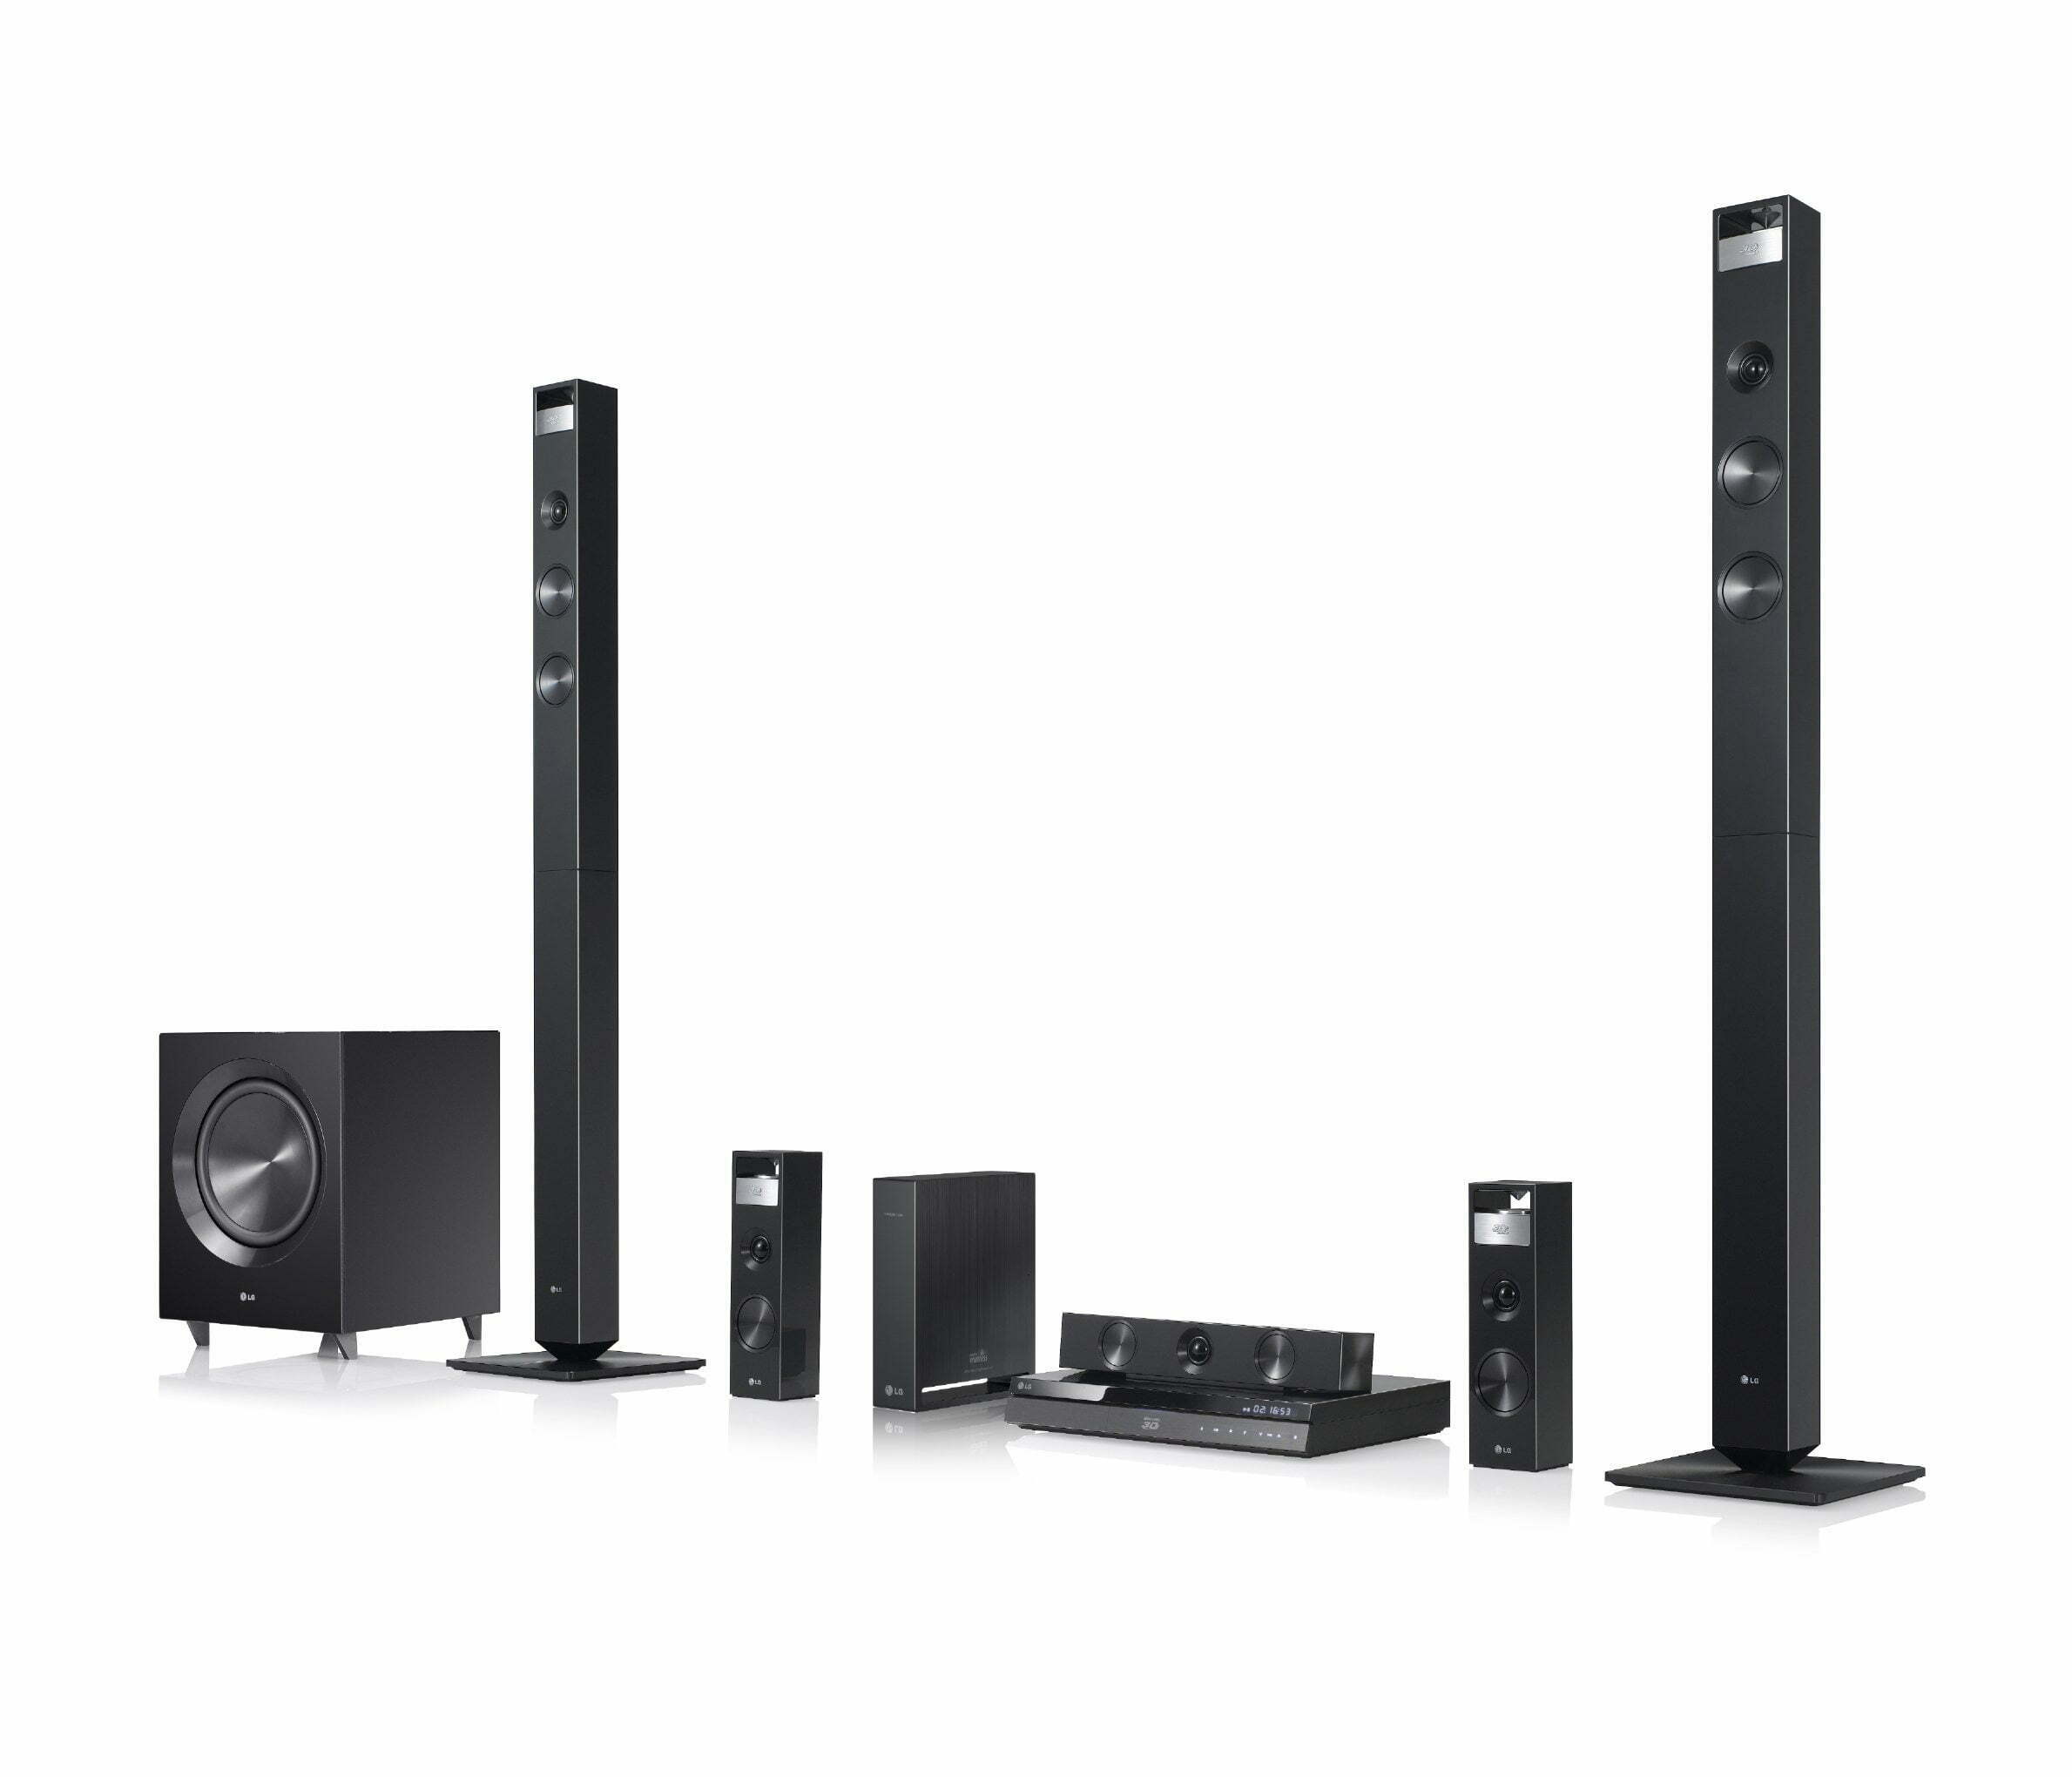 LG Disc Home Theater System BH9420PW Review - Gadget Review